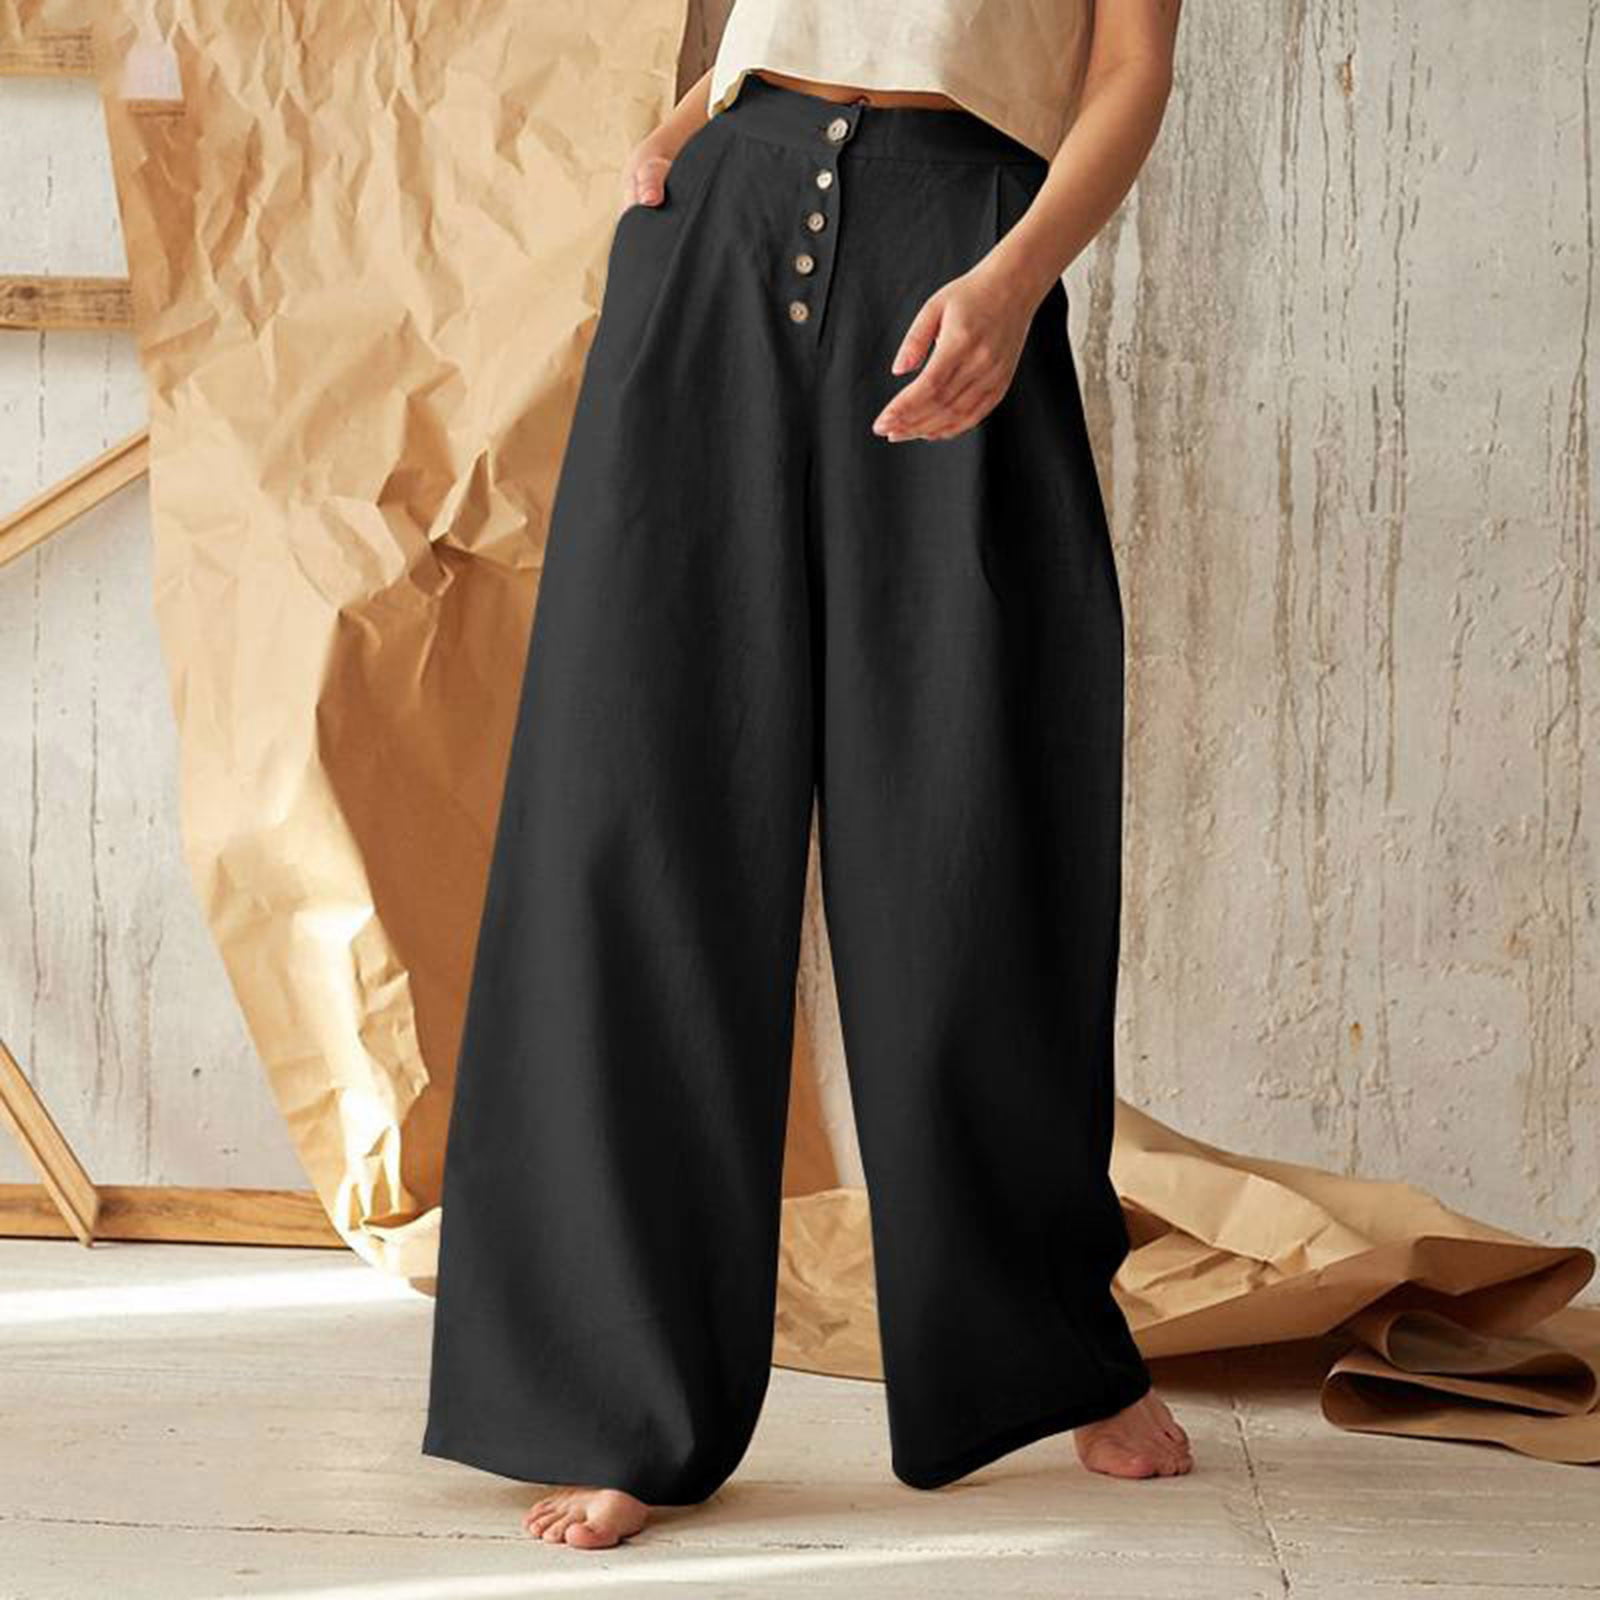 Women Cotton Linen Pants Summer Pockets Loose Baggy Drawstring Trousers  Female Casual High Waist Elastic Ankle-Length Pants - AliExpress